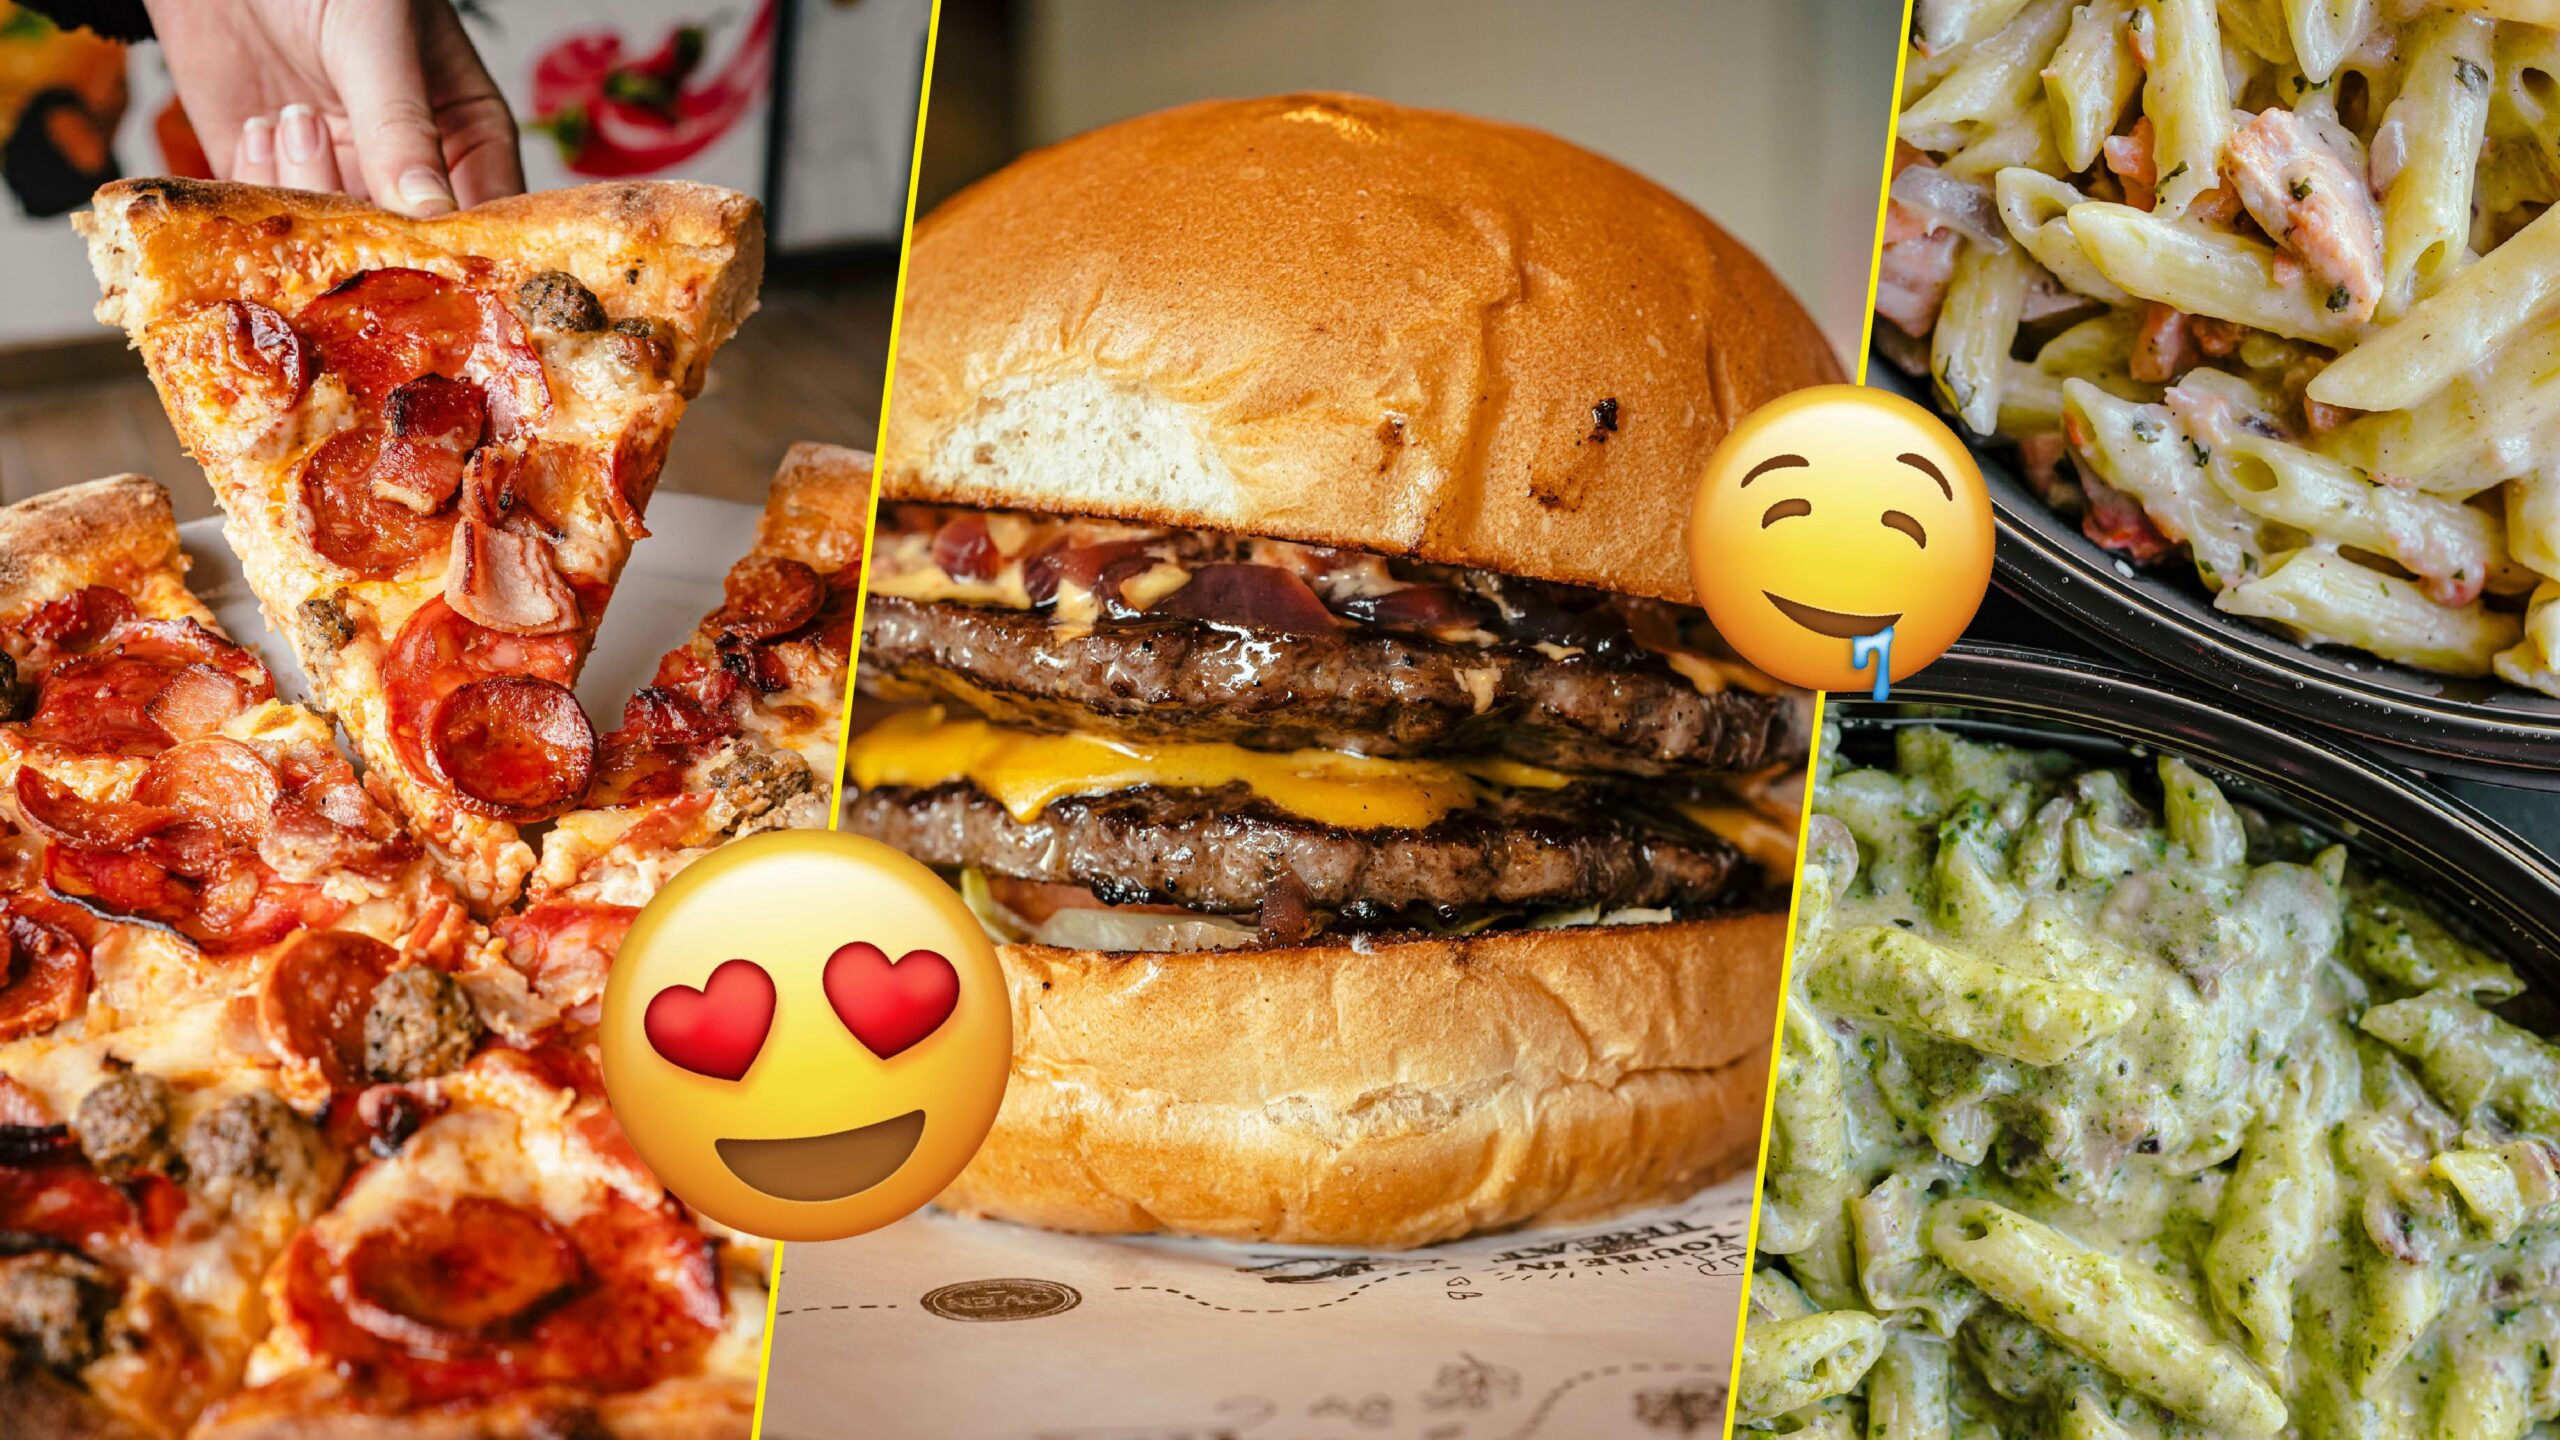 Burgers, pizzas & so much more: The Oven's HUGE menu has something for everyone